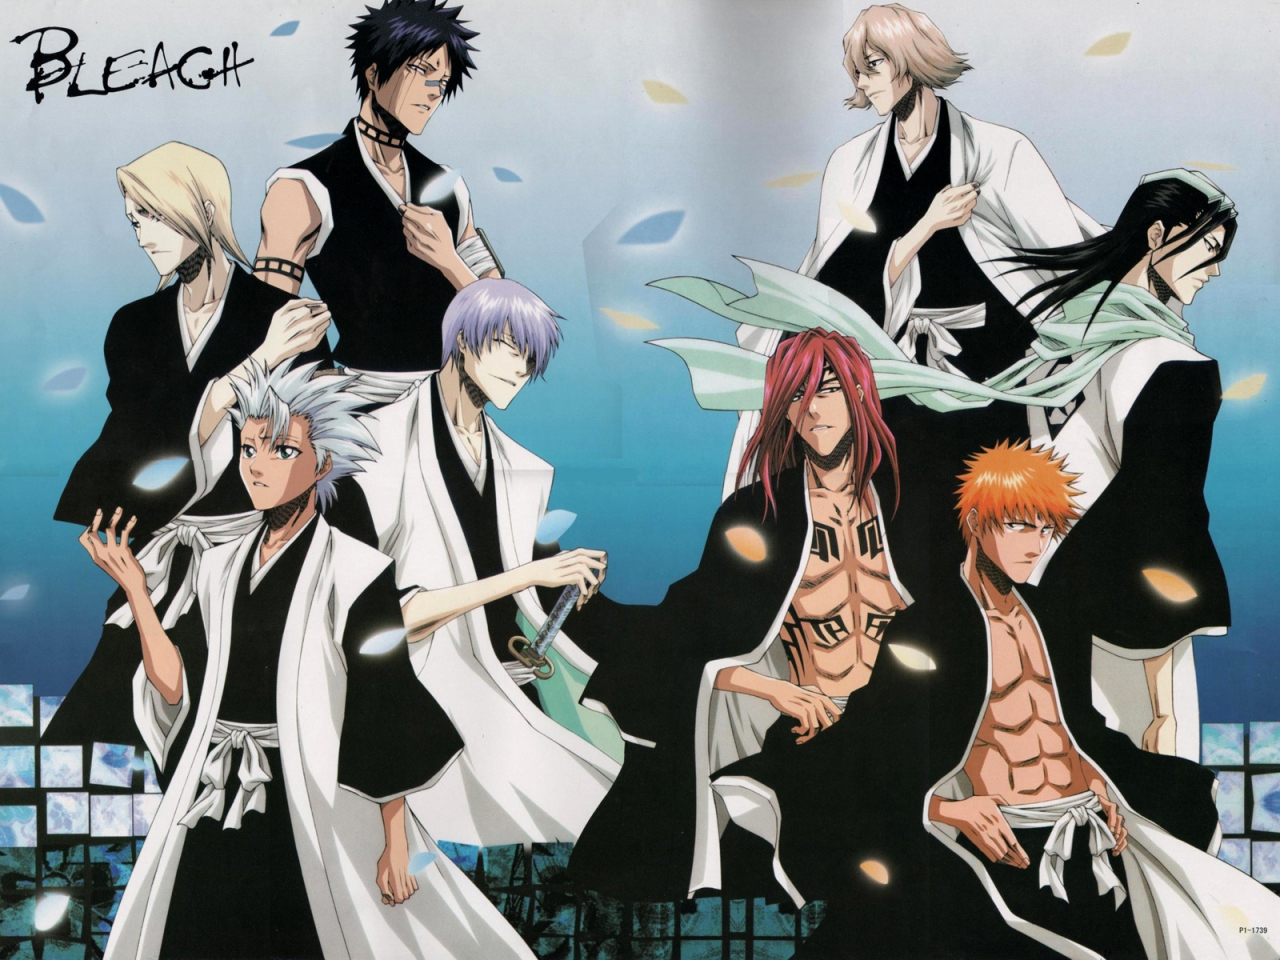 Bleach Anime Characters for 1280 x 960 resolution